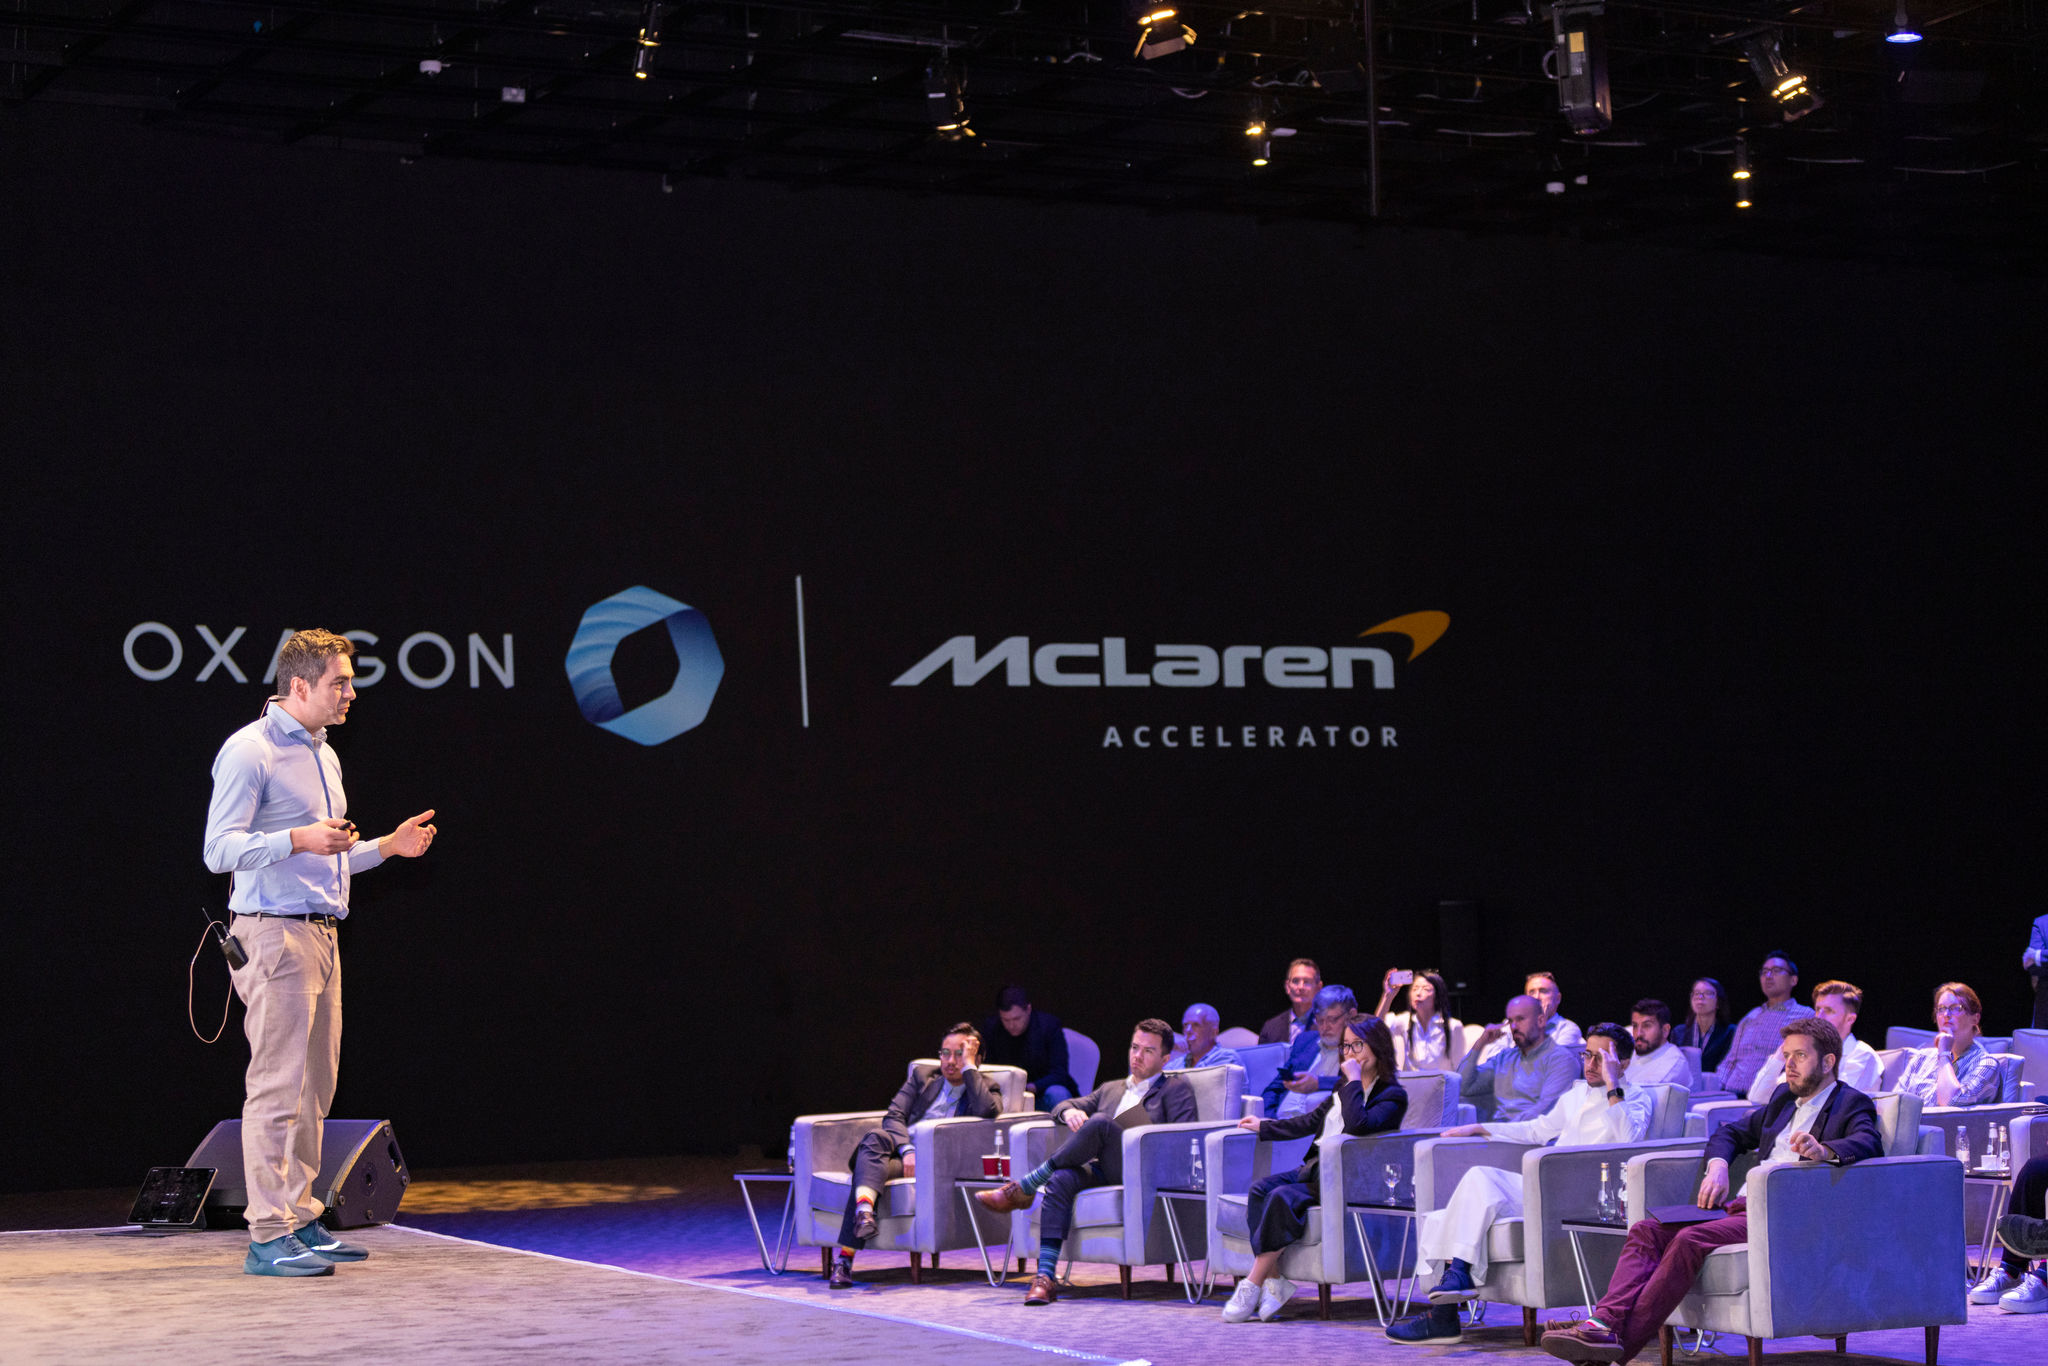 Oxagon x McLaren Accelerator's event in Riyadh where participants pitched  to investors and companies in 2023